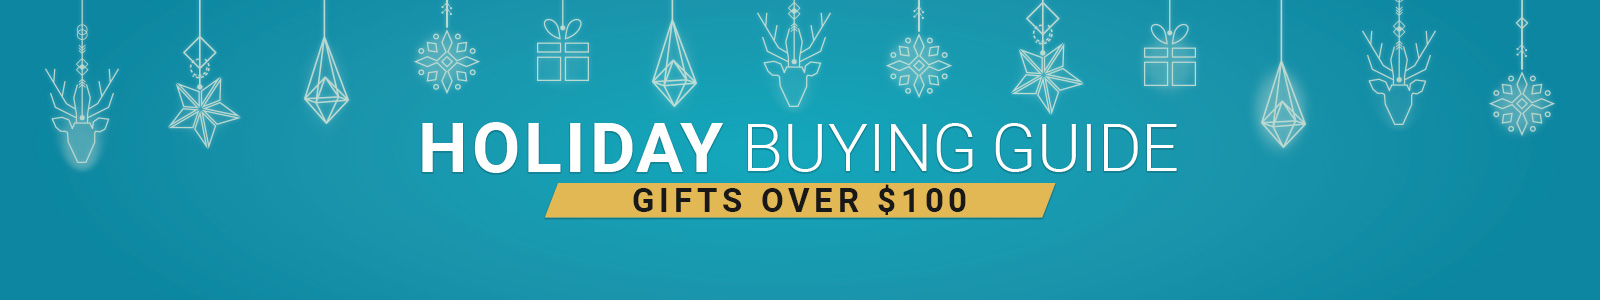 Holiday Buying Guide
Gifts over $100
Shop Now